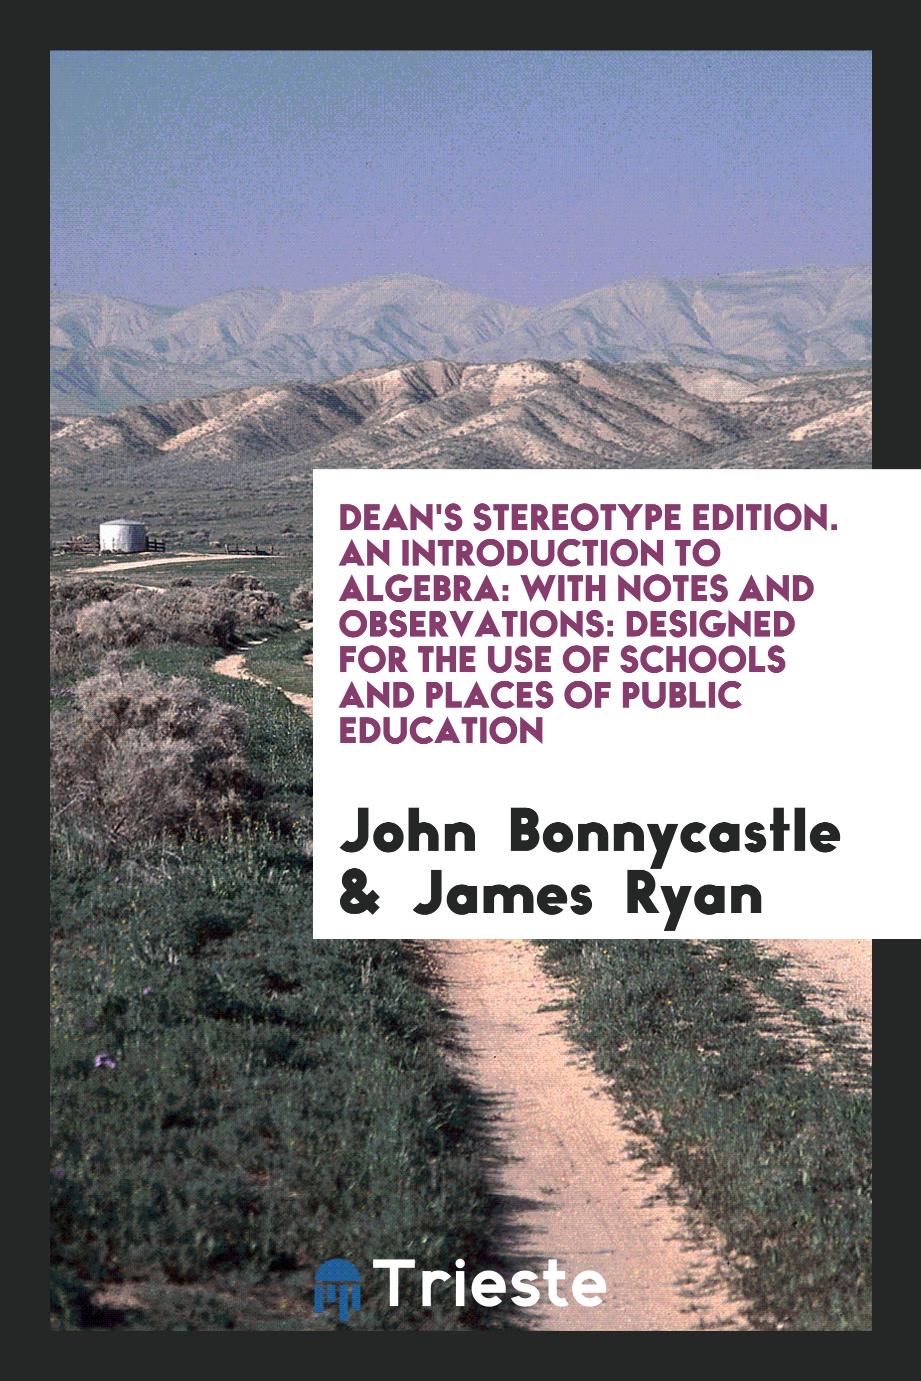 Dean's Stereotype Edition. An Introduction to Algebra: With Notes and Observations: Designed for the Use of Schools and Places of Public Education